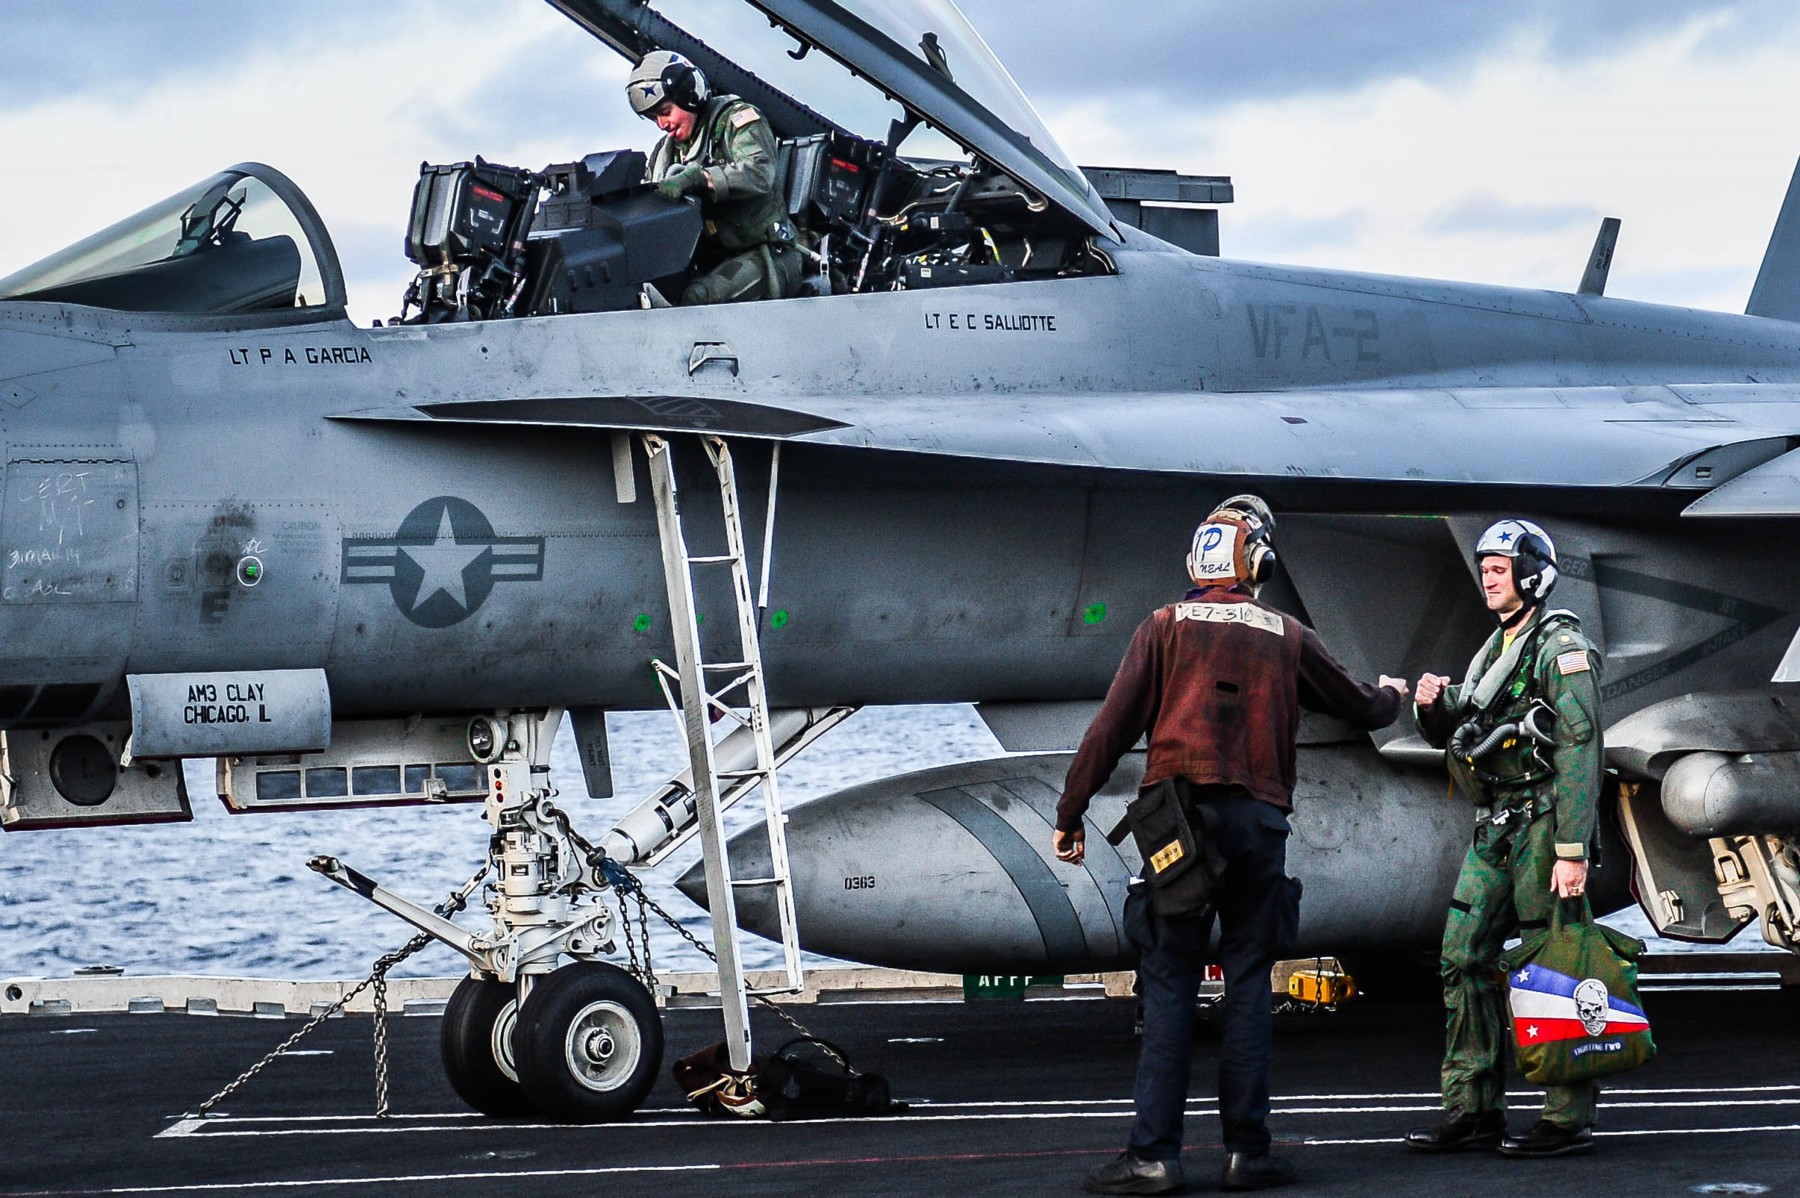 vfa-2 bounty hunters strike fighter squadron us navy f/a-18f super hornet carrier air wing cvw-2 uss ronald reagan cvn-76 19